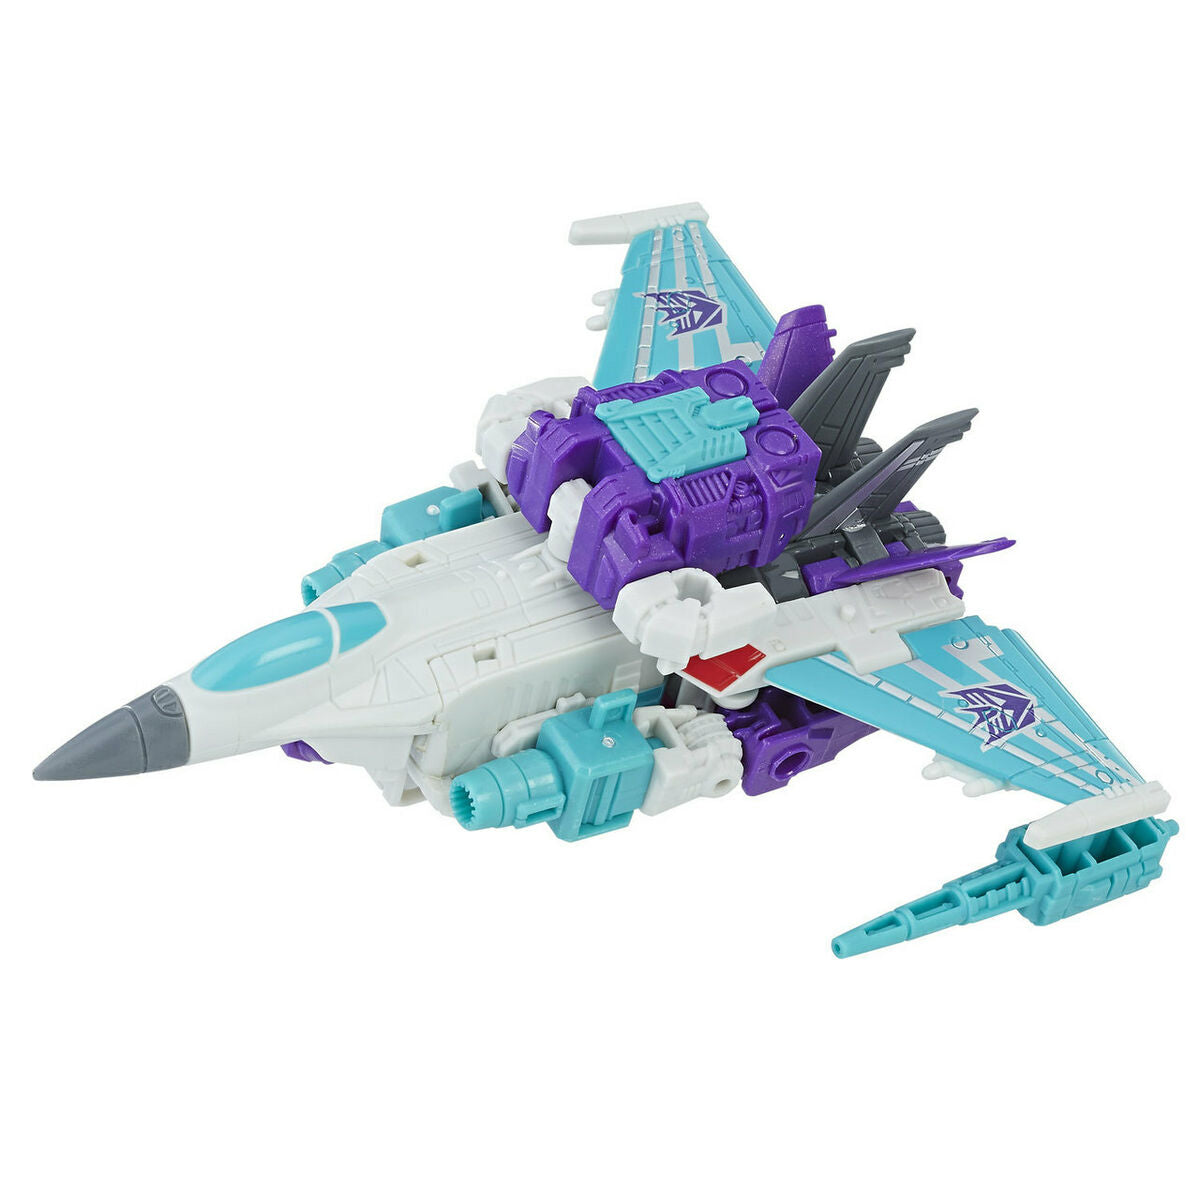 Transformers Power of the Primes Dreadwind